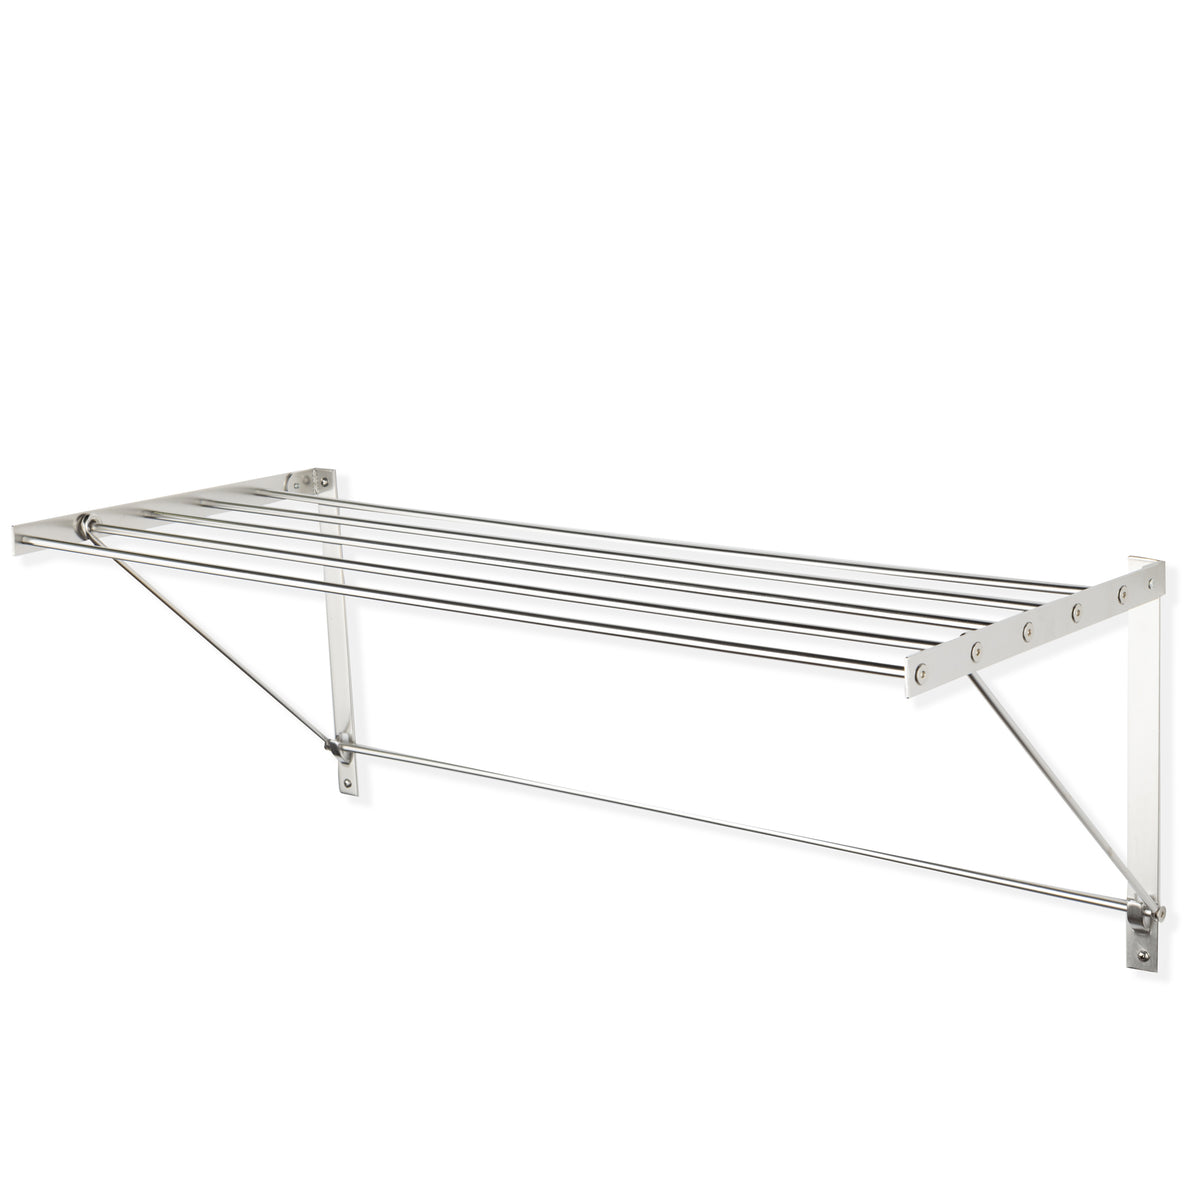 Mainstays Oversized Collapsible Steel Laundry Drying Rack, Silver 